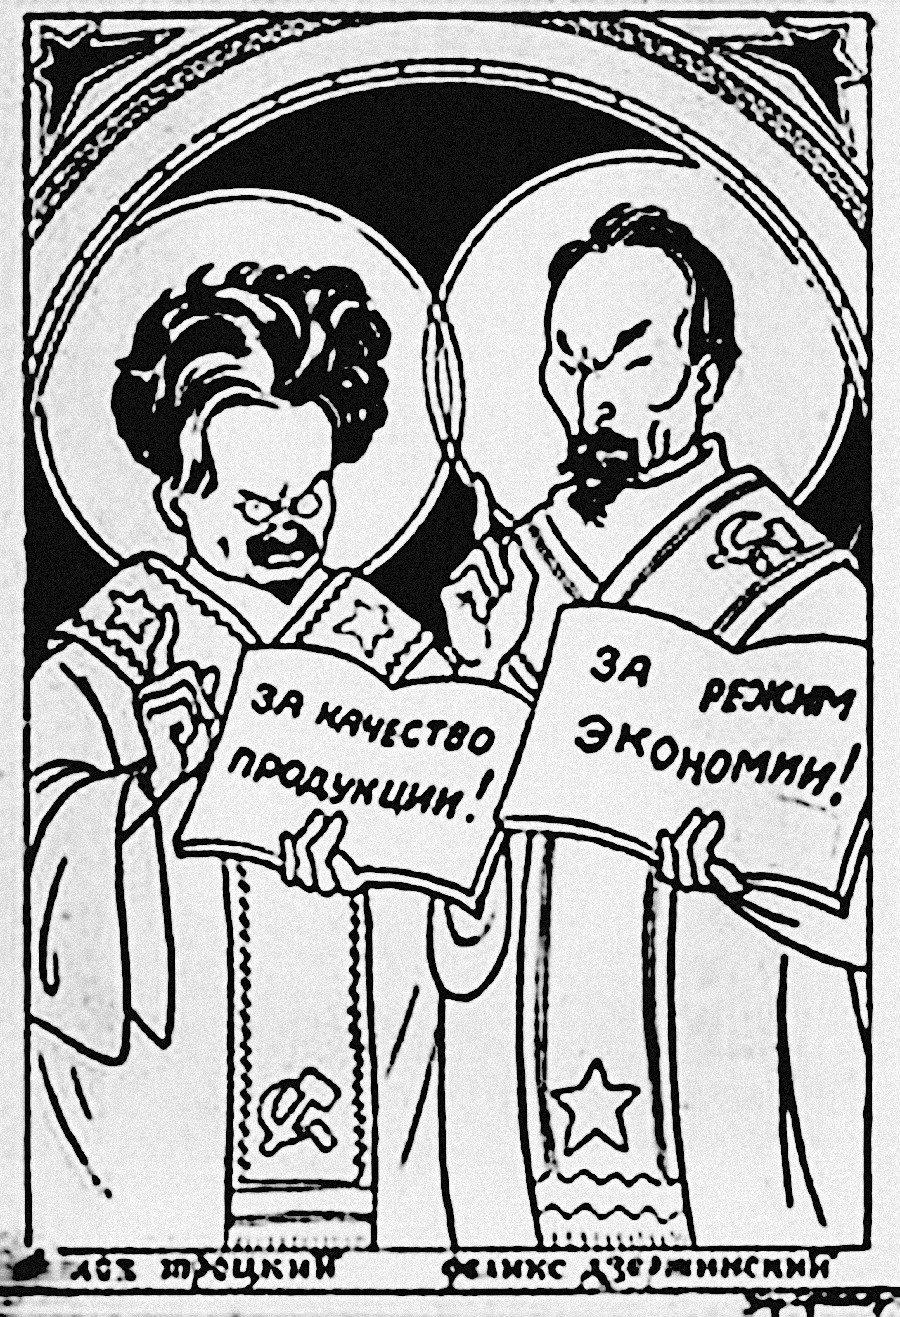 Both Leon Trotsky and Felix Dzerzhinsky, who in the mid-1920s served as head of the Supreme Soviet of National Economy, were depicted as saints. The former is marked by the words: “For the Quality of Production;” while the latter: “For the Regime of Savings”